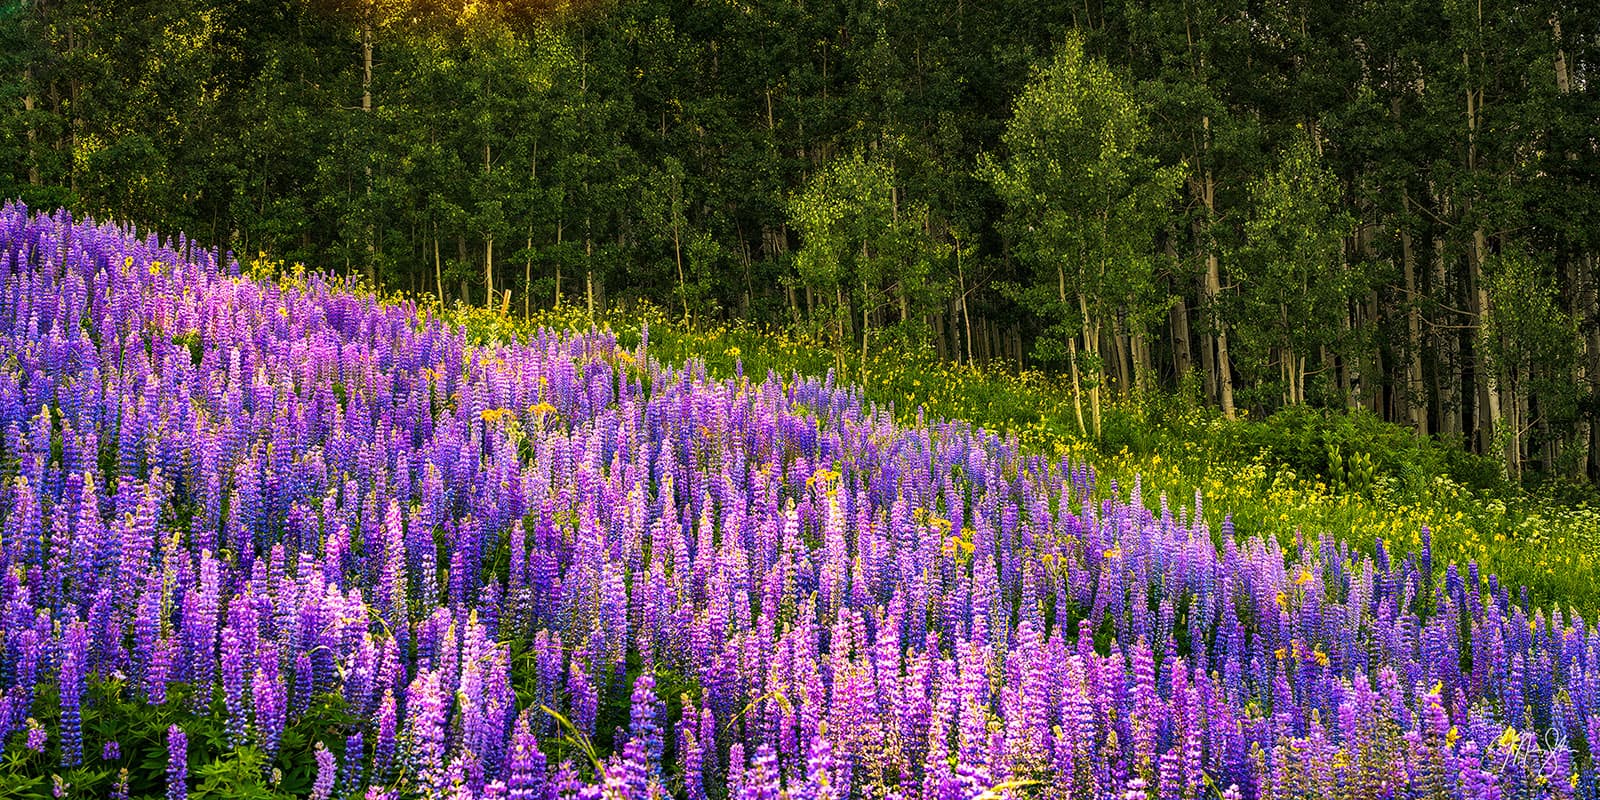 Crested Butte Wildflowers - Crested Butte, Colorado